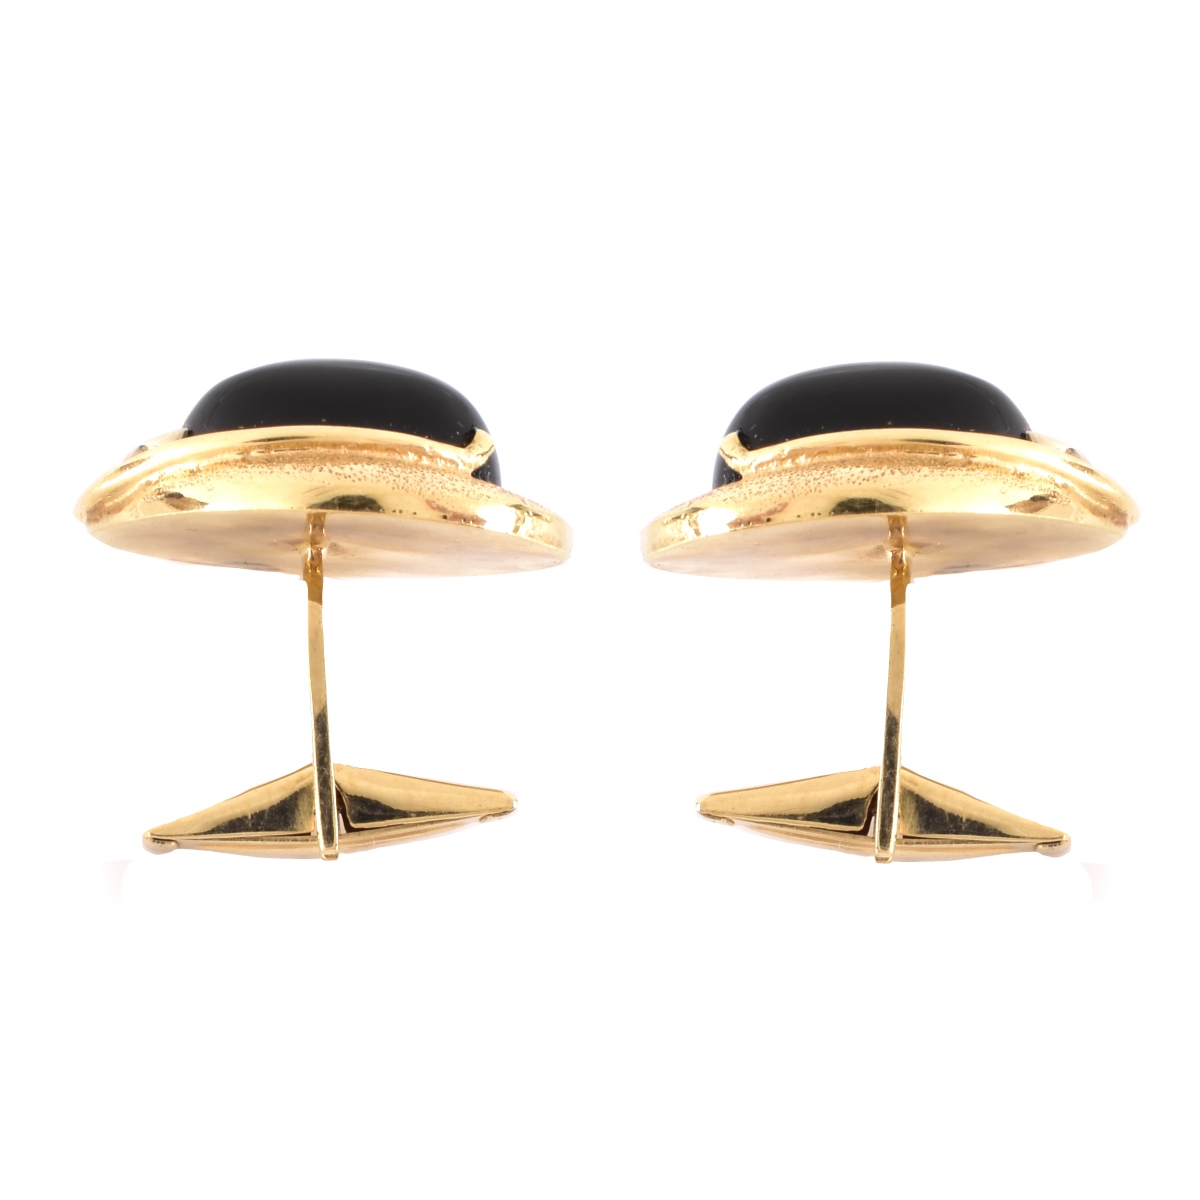 Vintage 14K Gold and Onyx Cufflinks